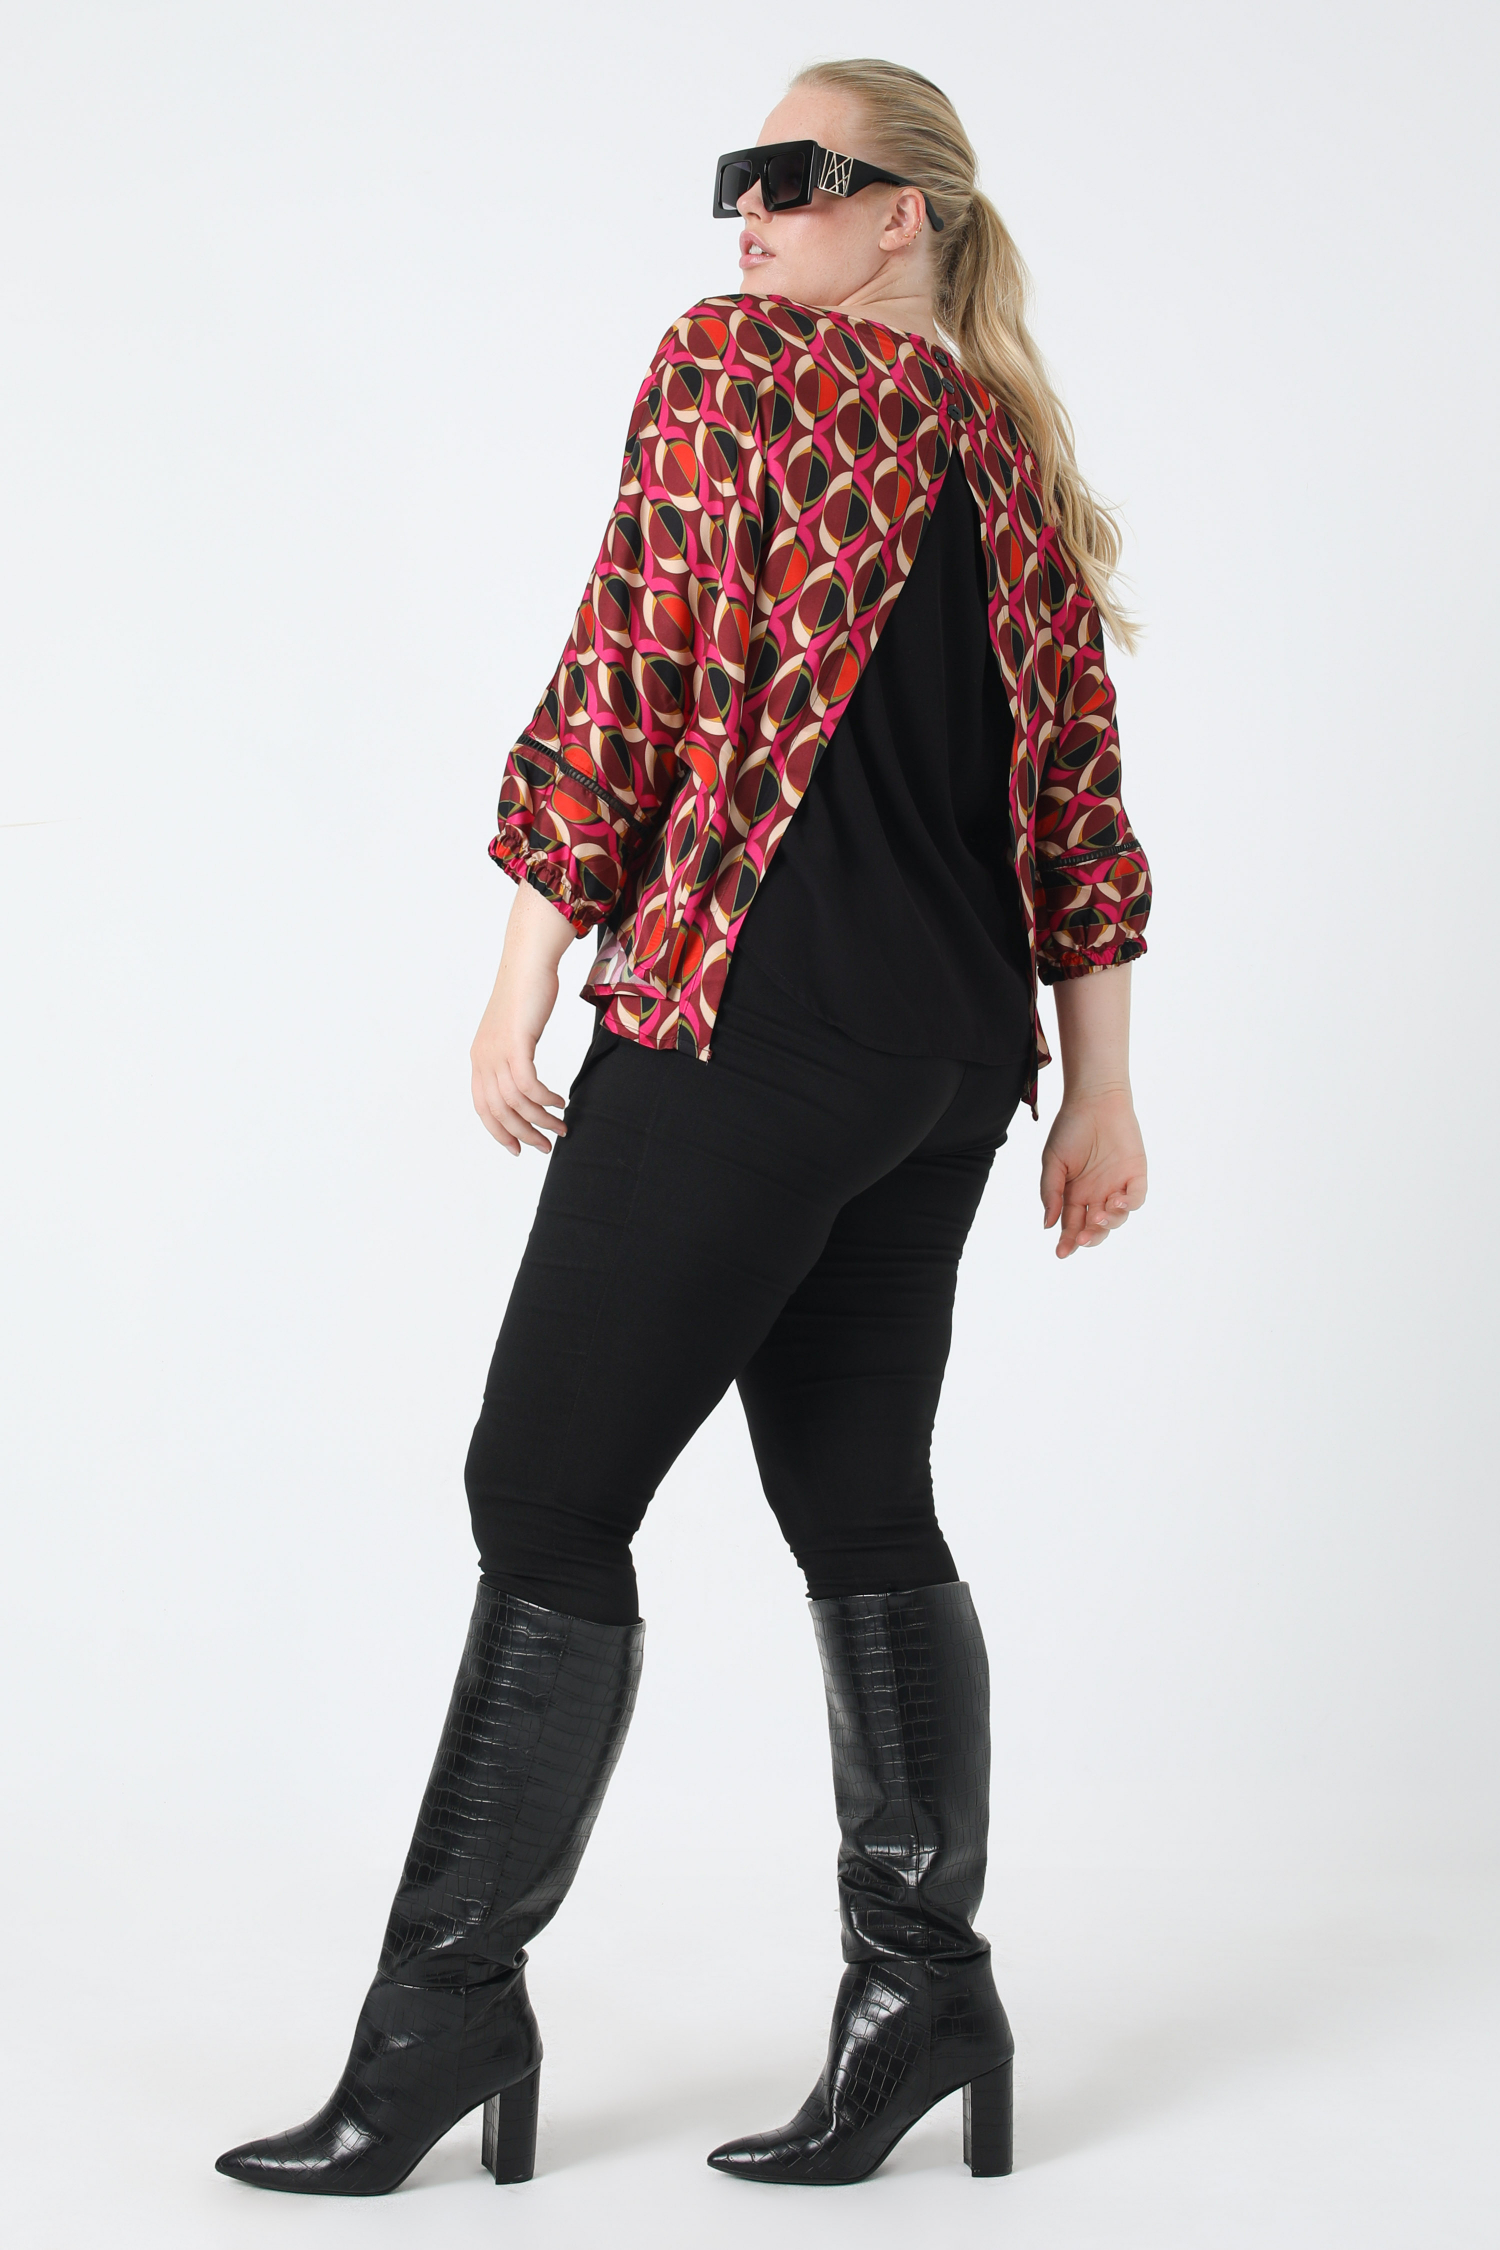 Overlay blouse with graphic satin print